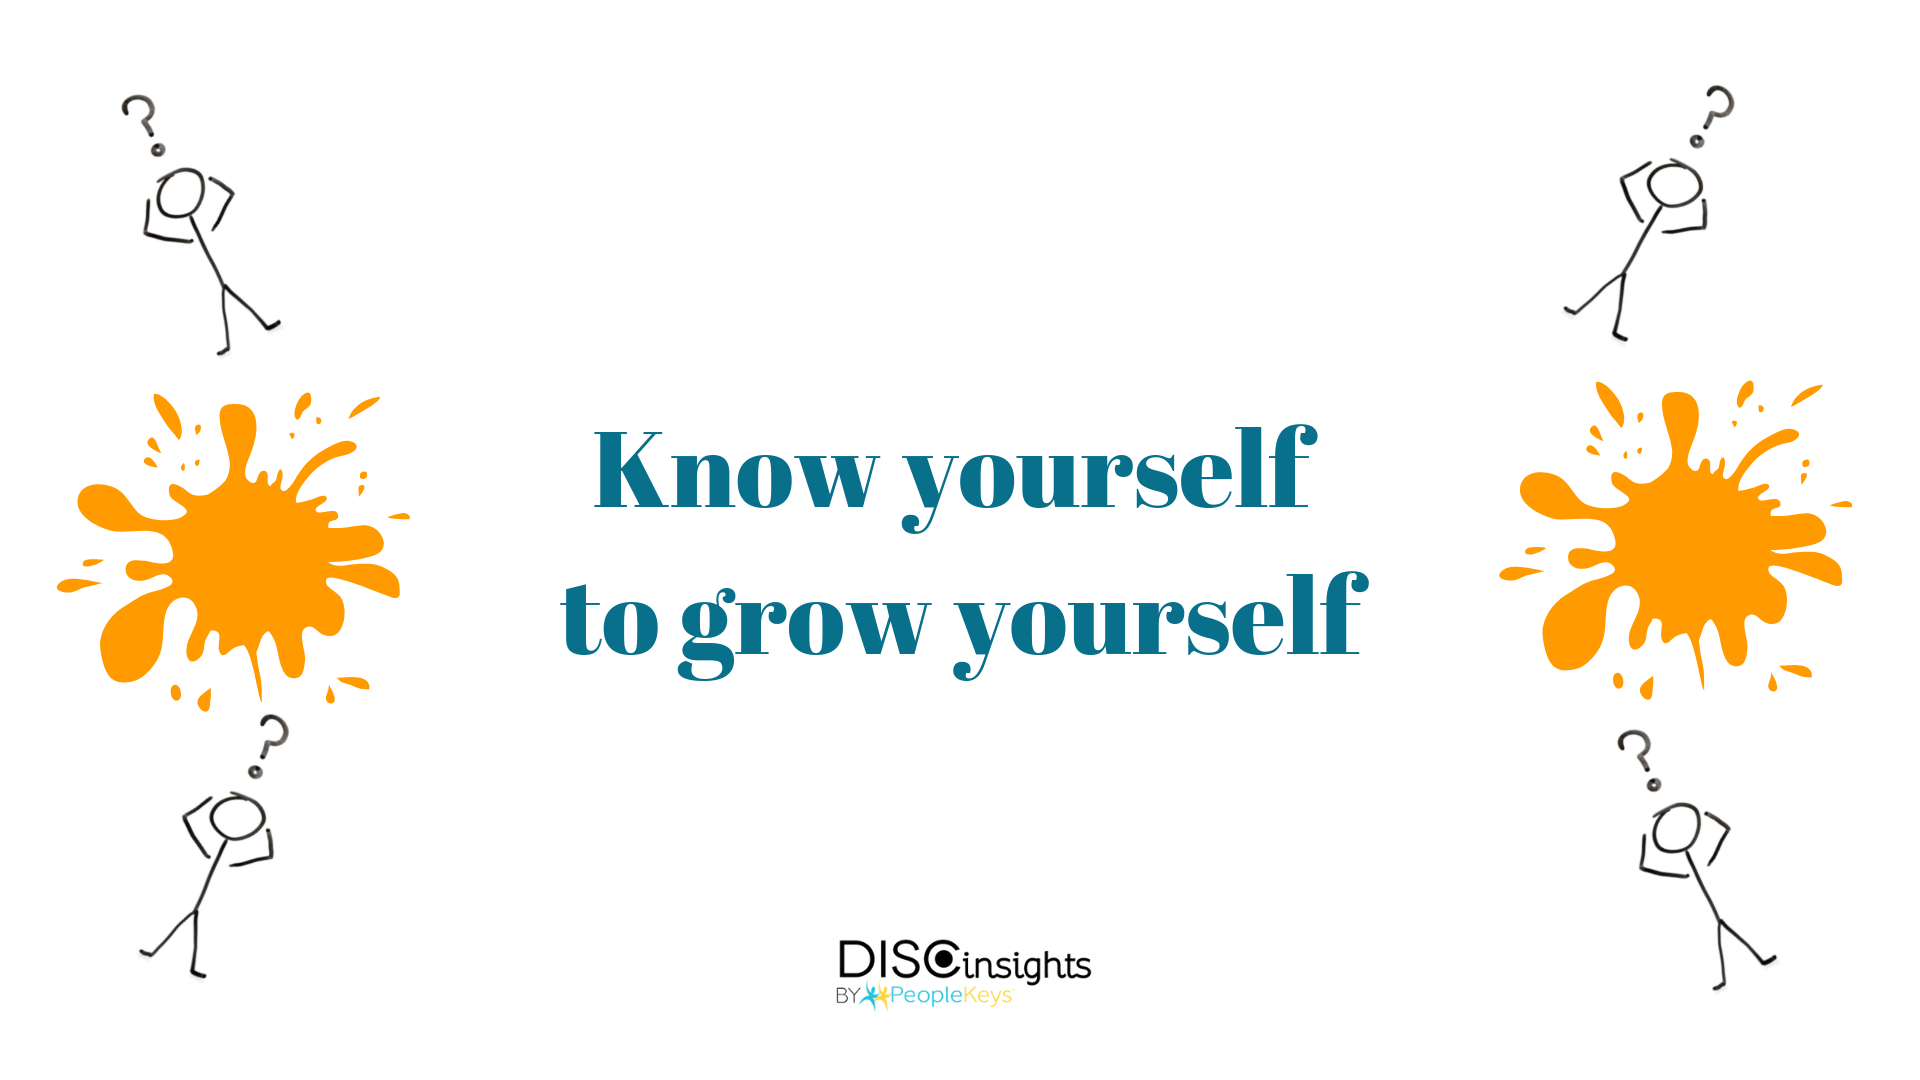 Know yourself to grow yourself